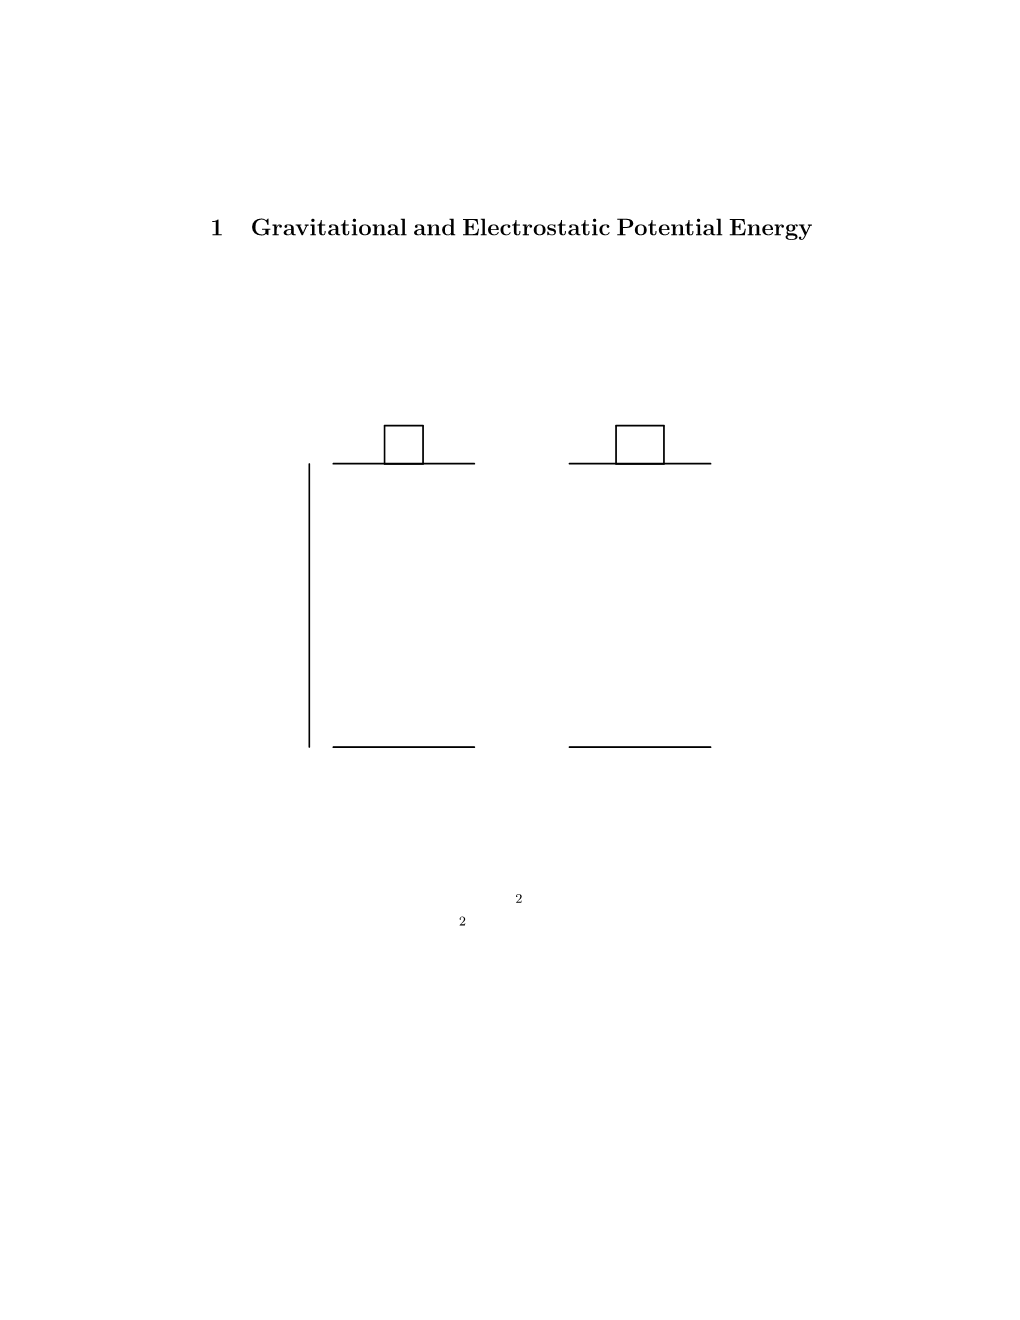 1 Gravitational and Electrostatic Potential Energy